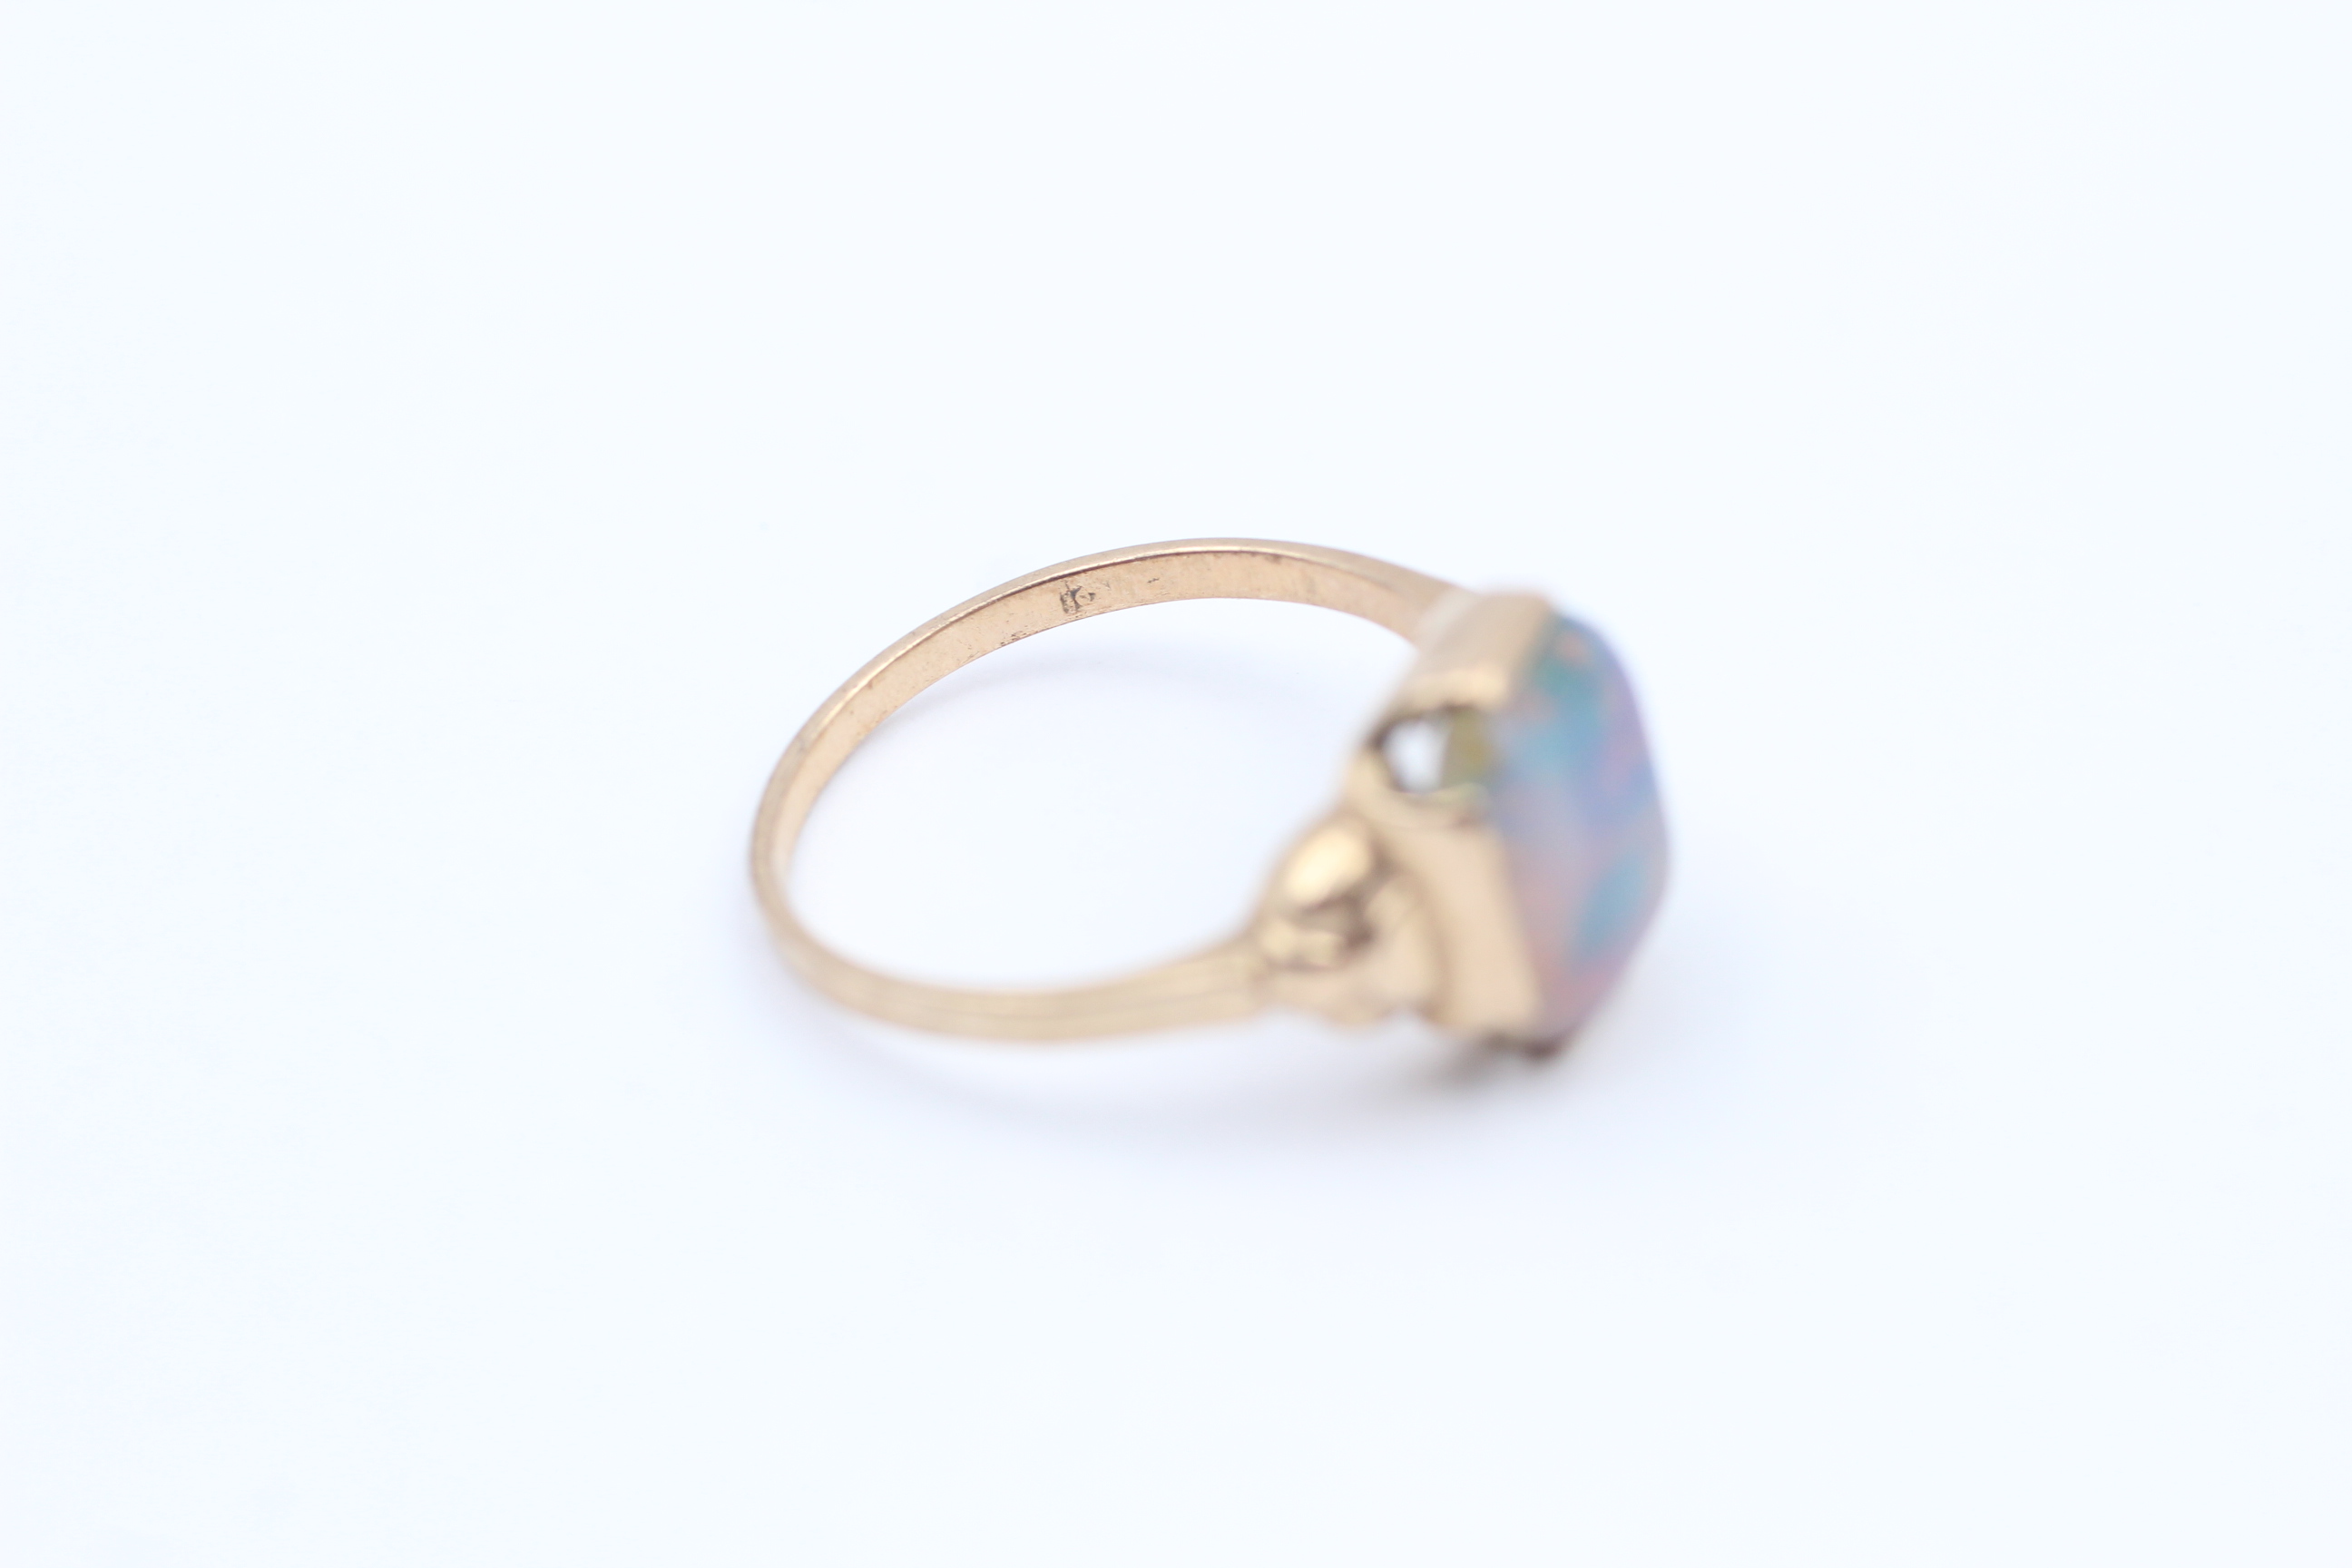 9ct Gold Vintage Opal Statement Ring - Image 4 of 4